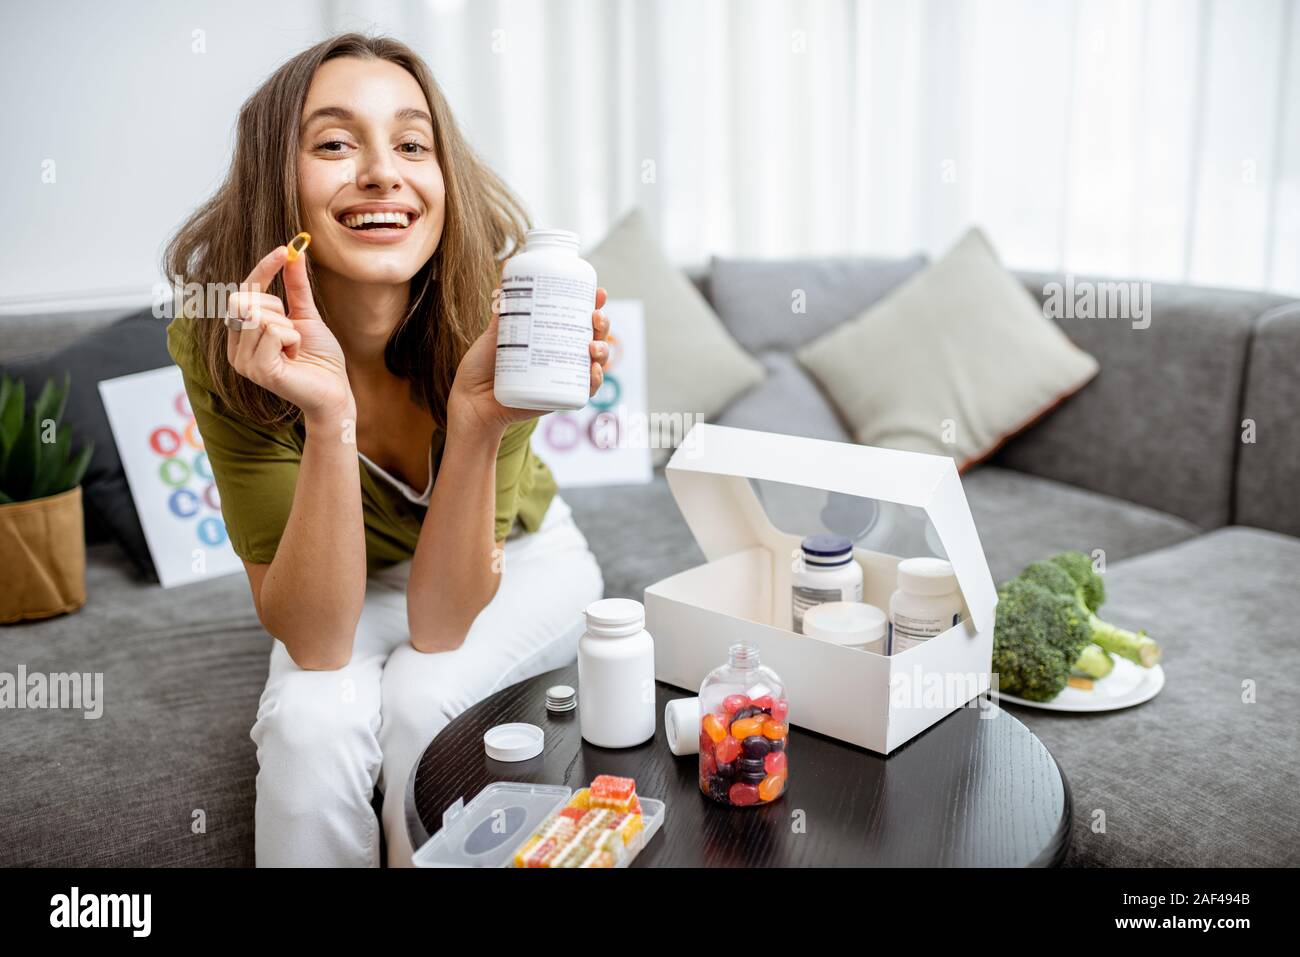 Portrait of a young smiling woman taking nutritional supplements at home. Concept of biohacking and preventive medicine Stock Photo